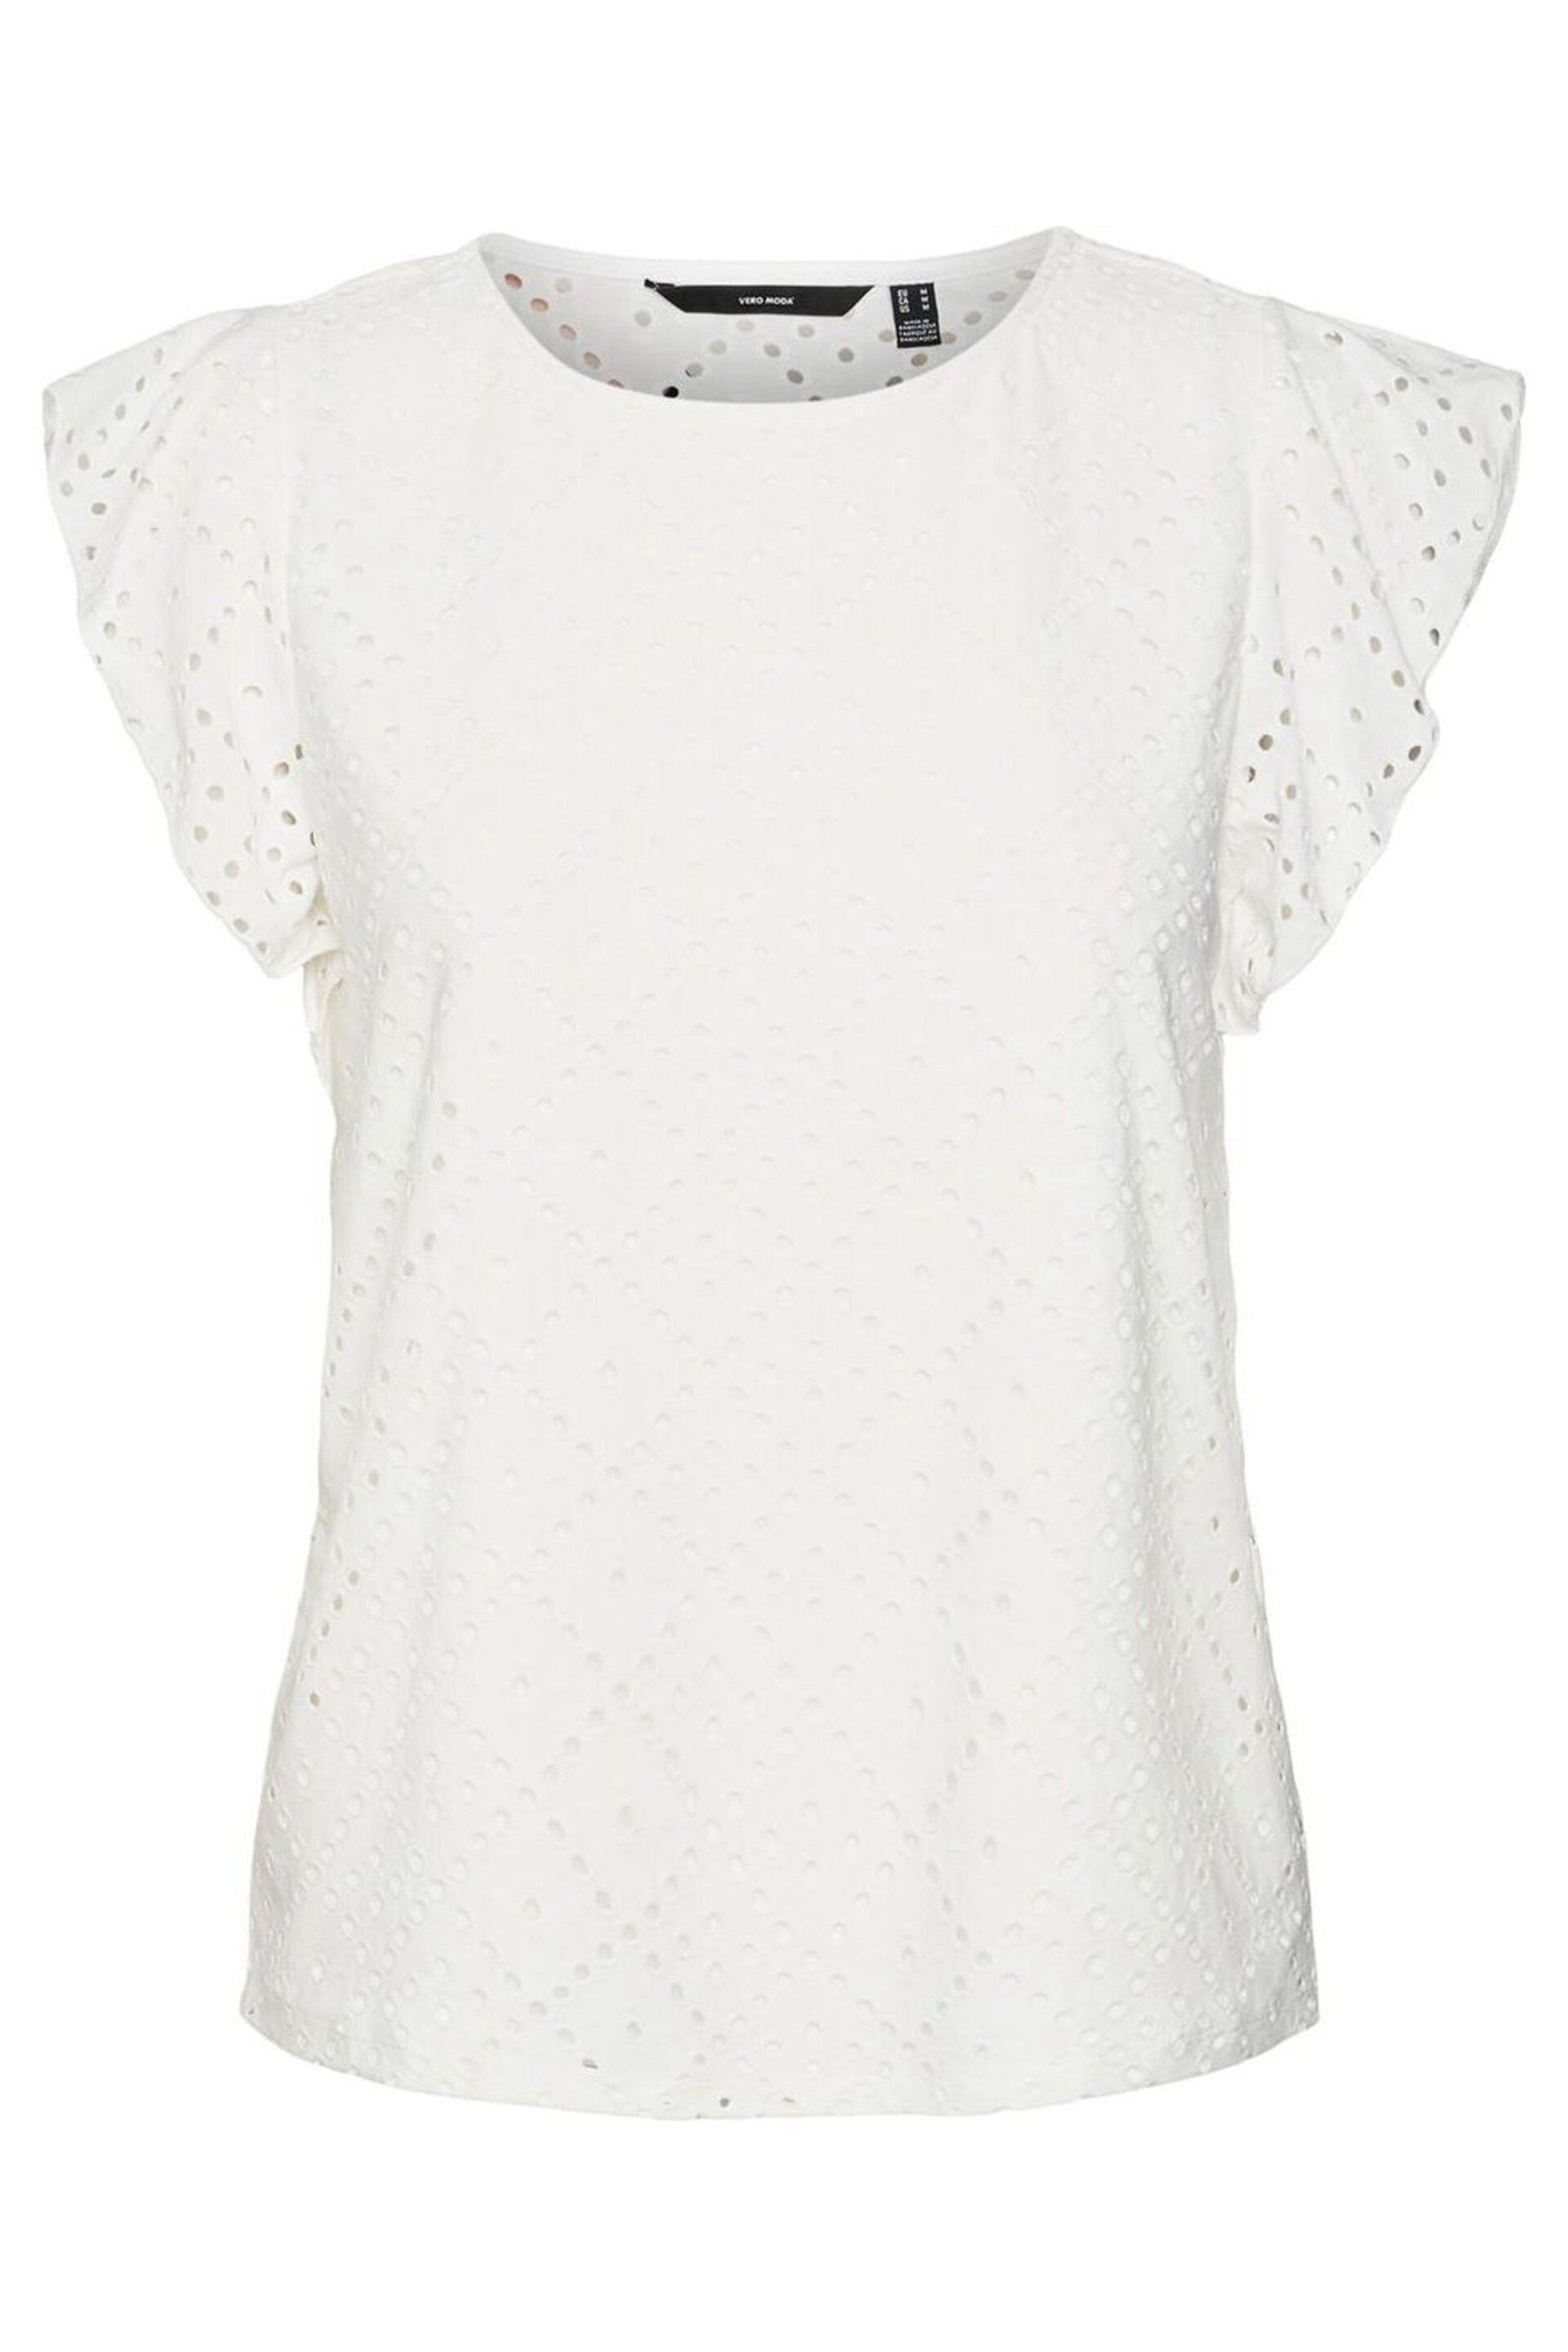 VERO MODA White Frilled Sleeve Broderie Top - Image 5 of 5